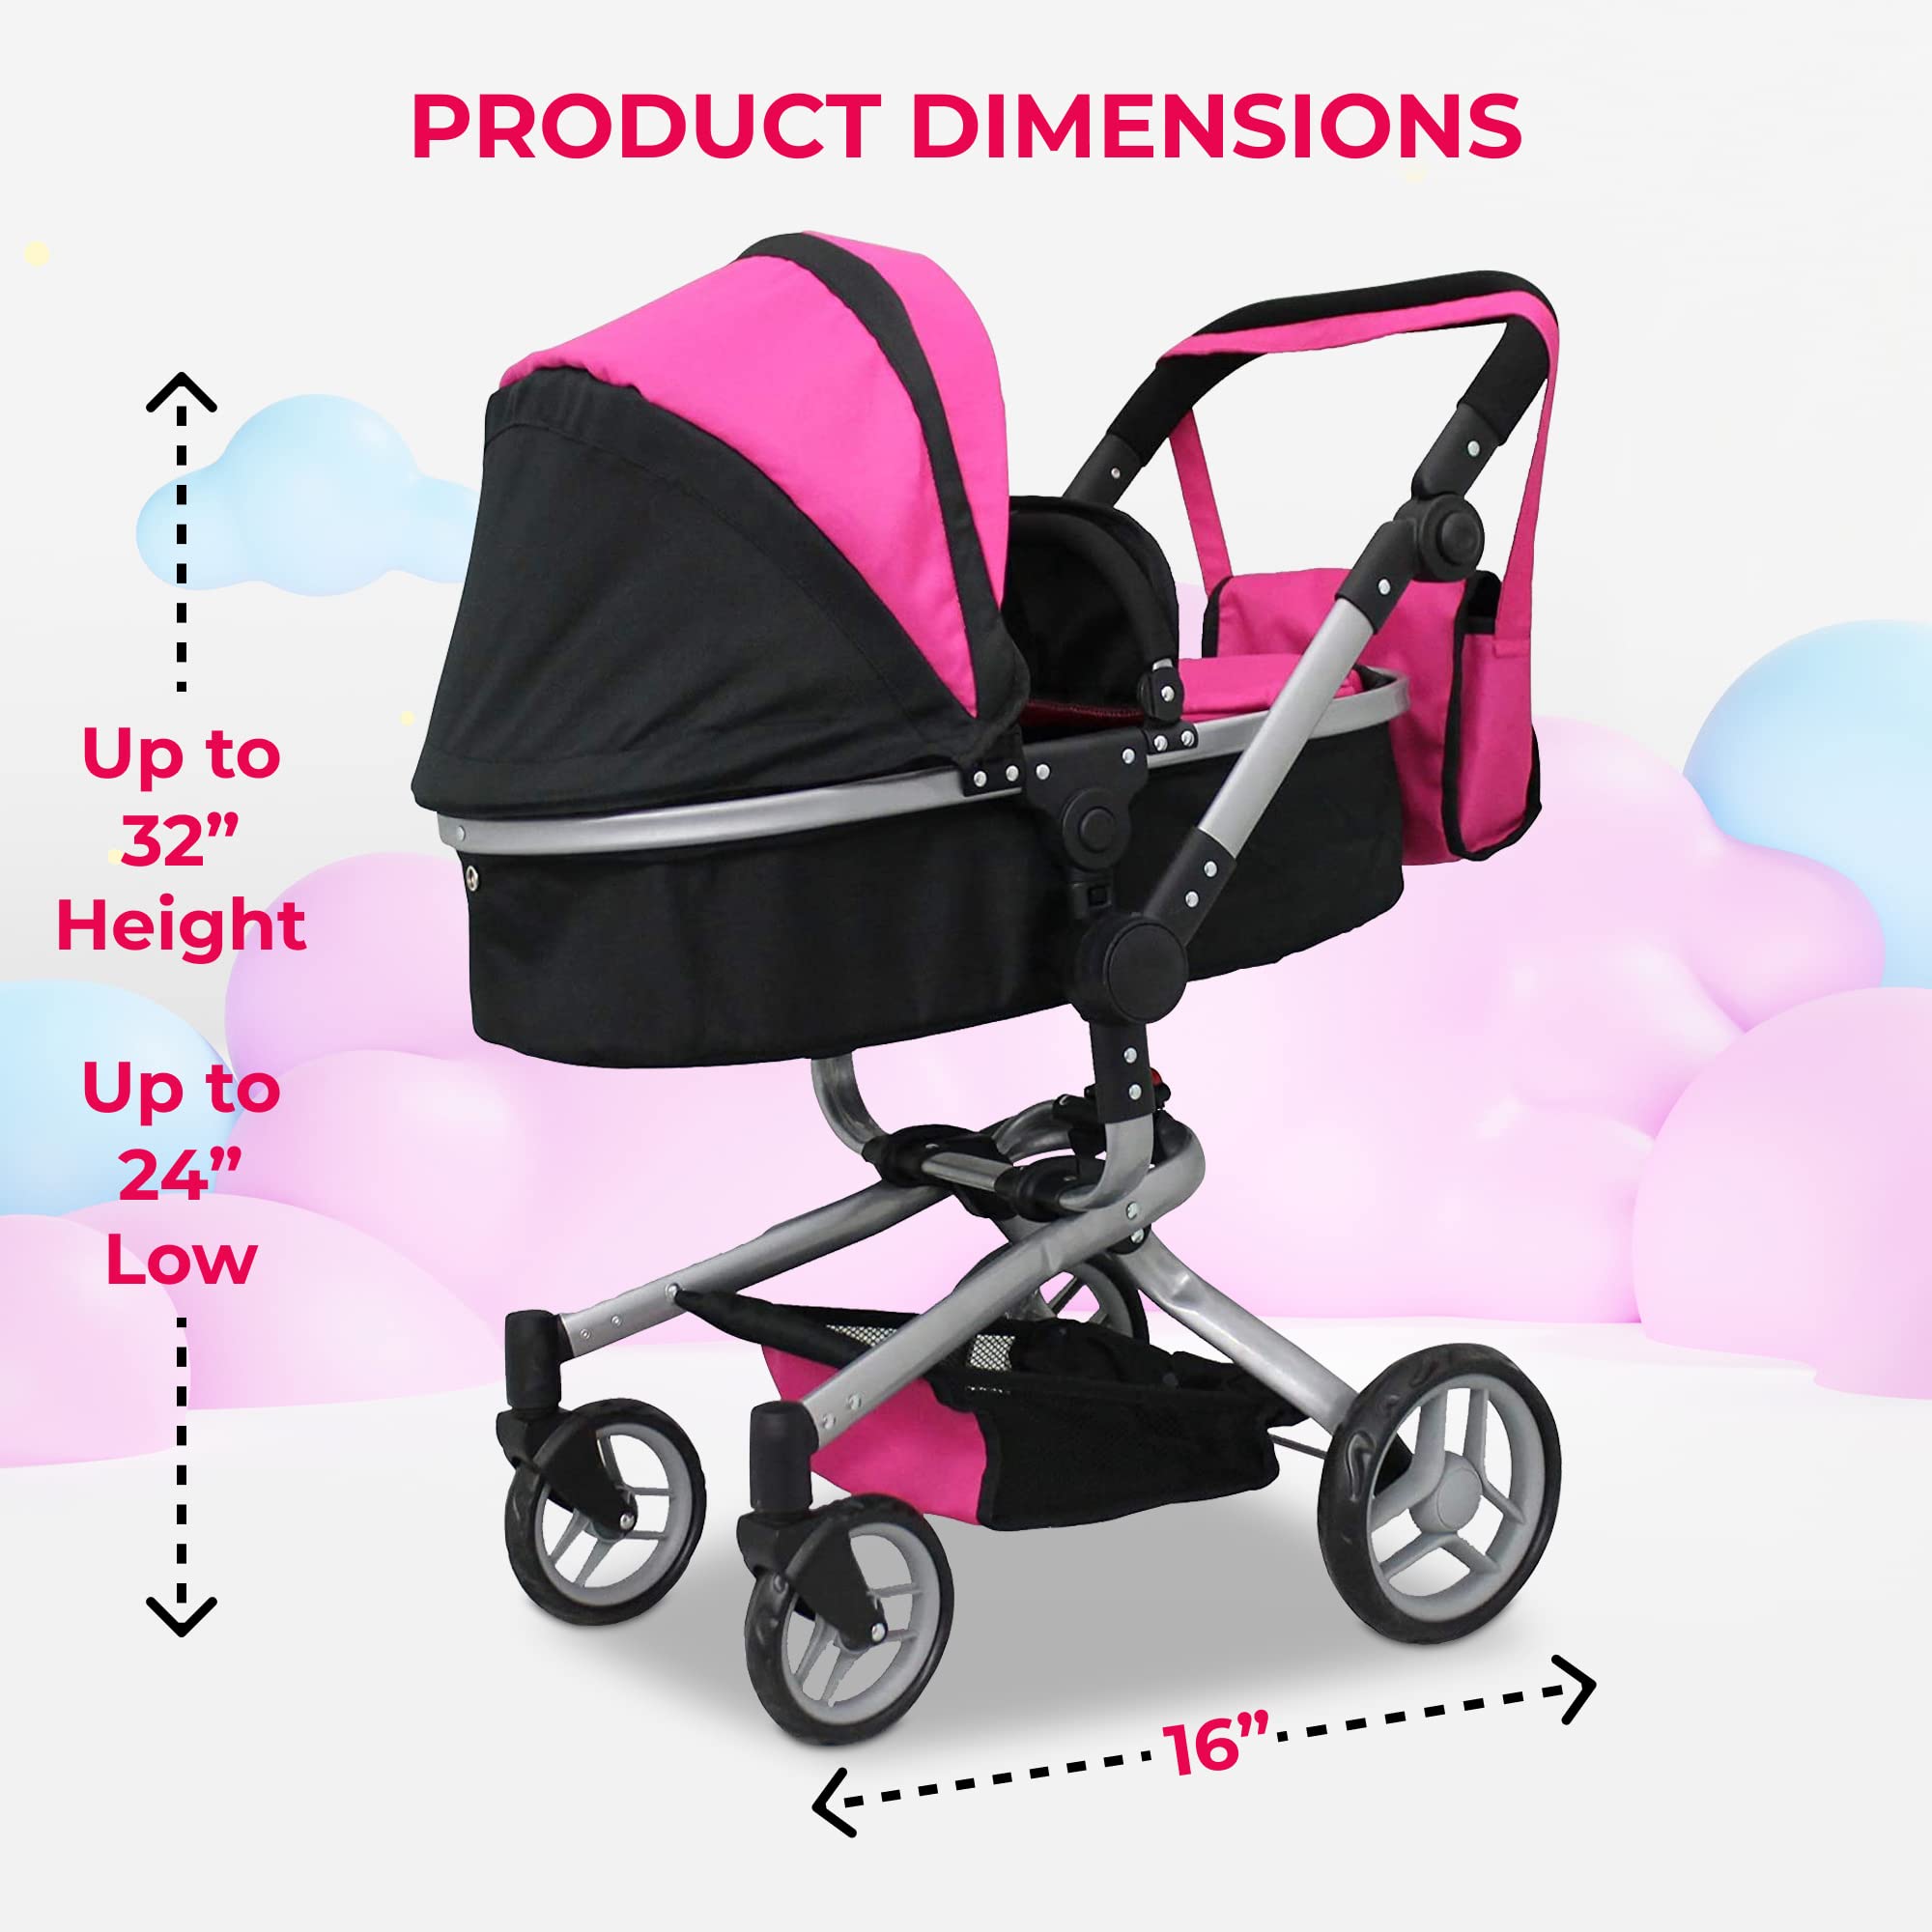 Mommy & me 2 in 1 Deluxe Doll Stroller Extra Tall 32'' HIGH (View All Photos) 9695